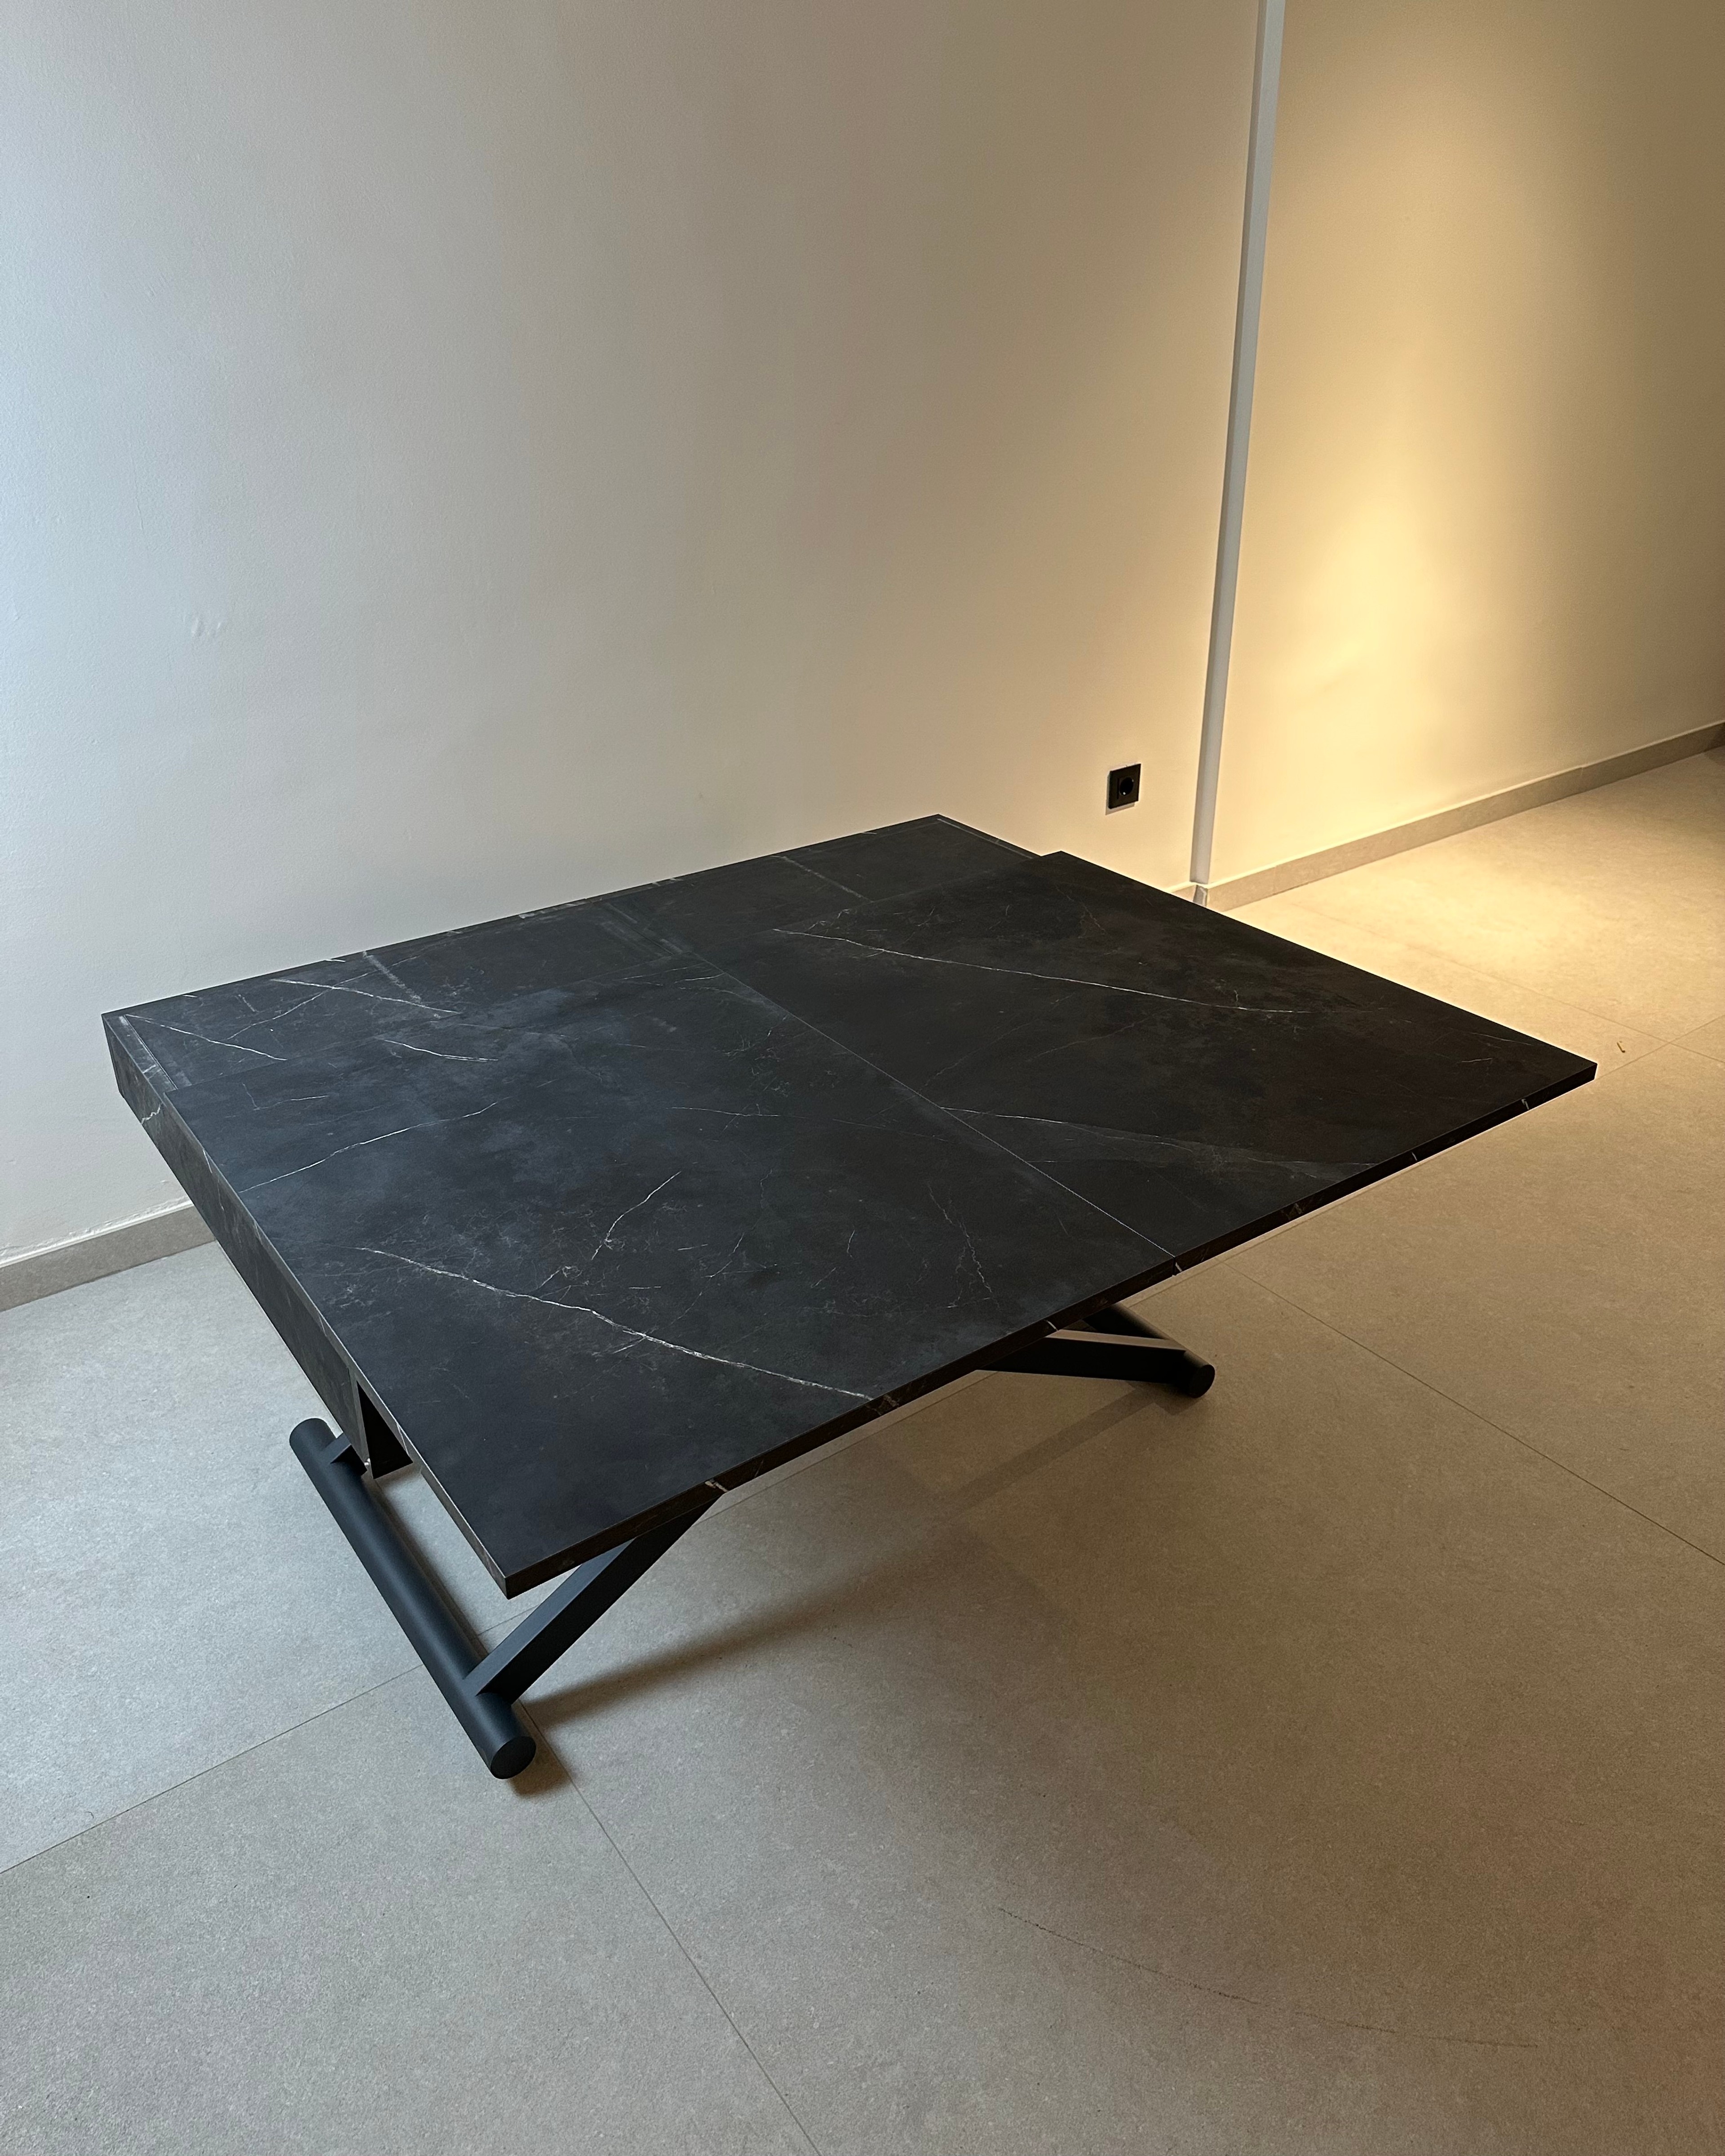 The viral table - Black Marble